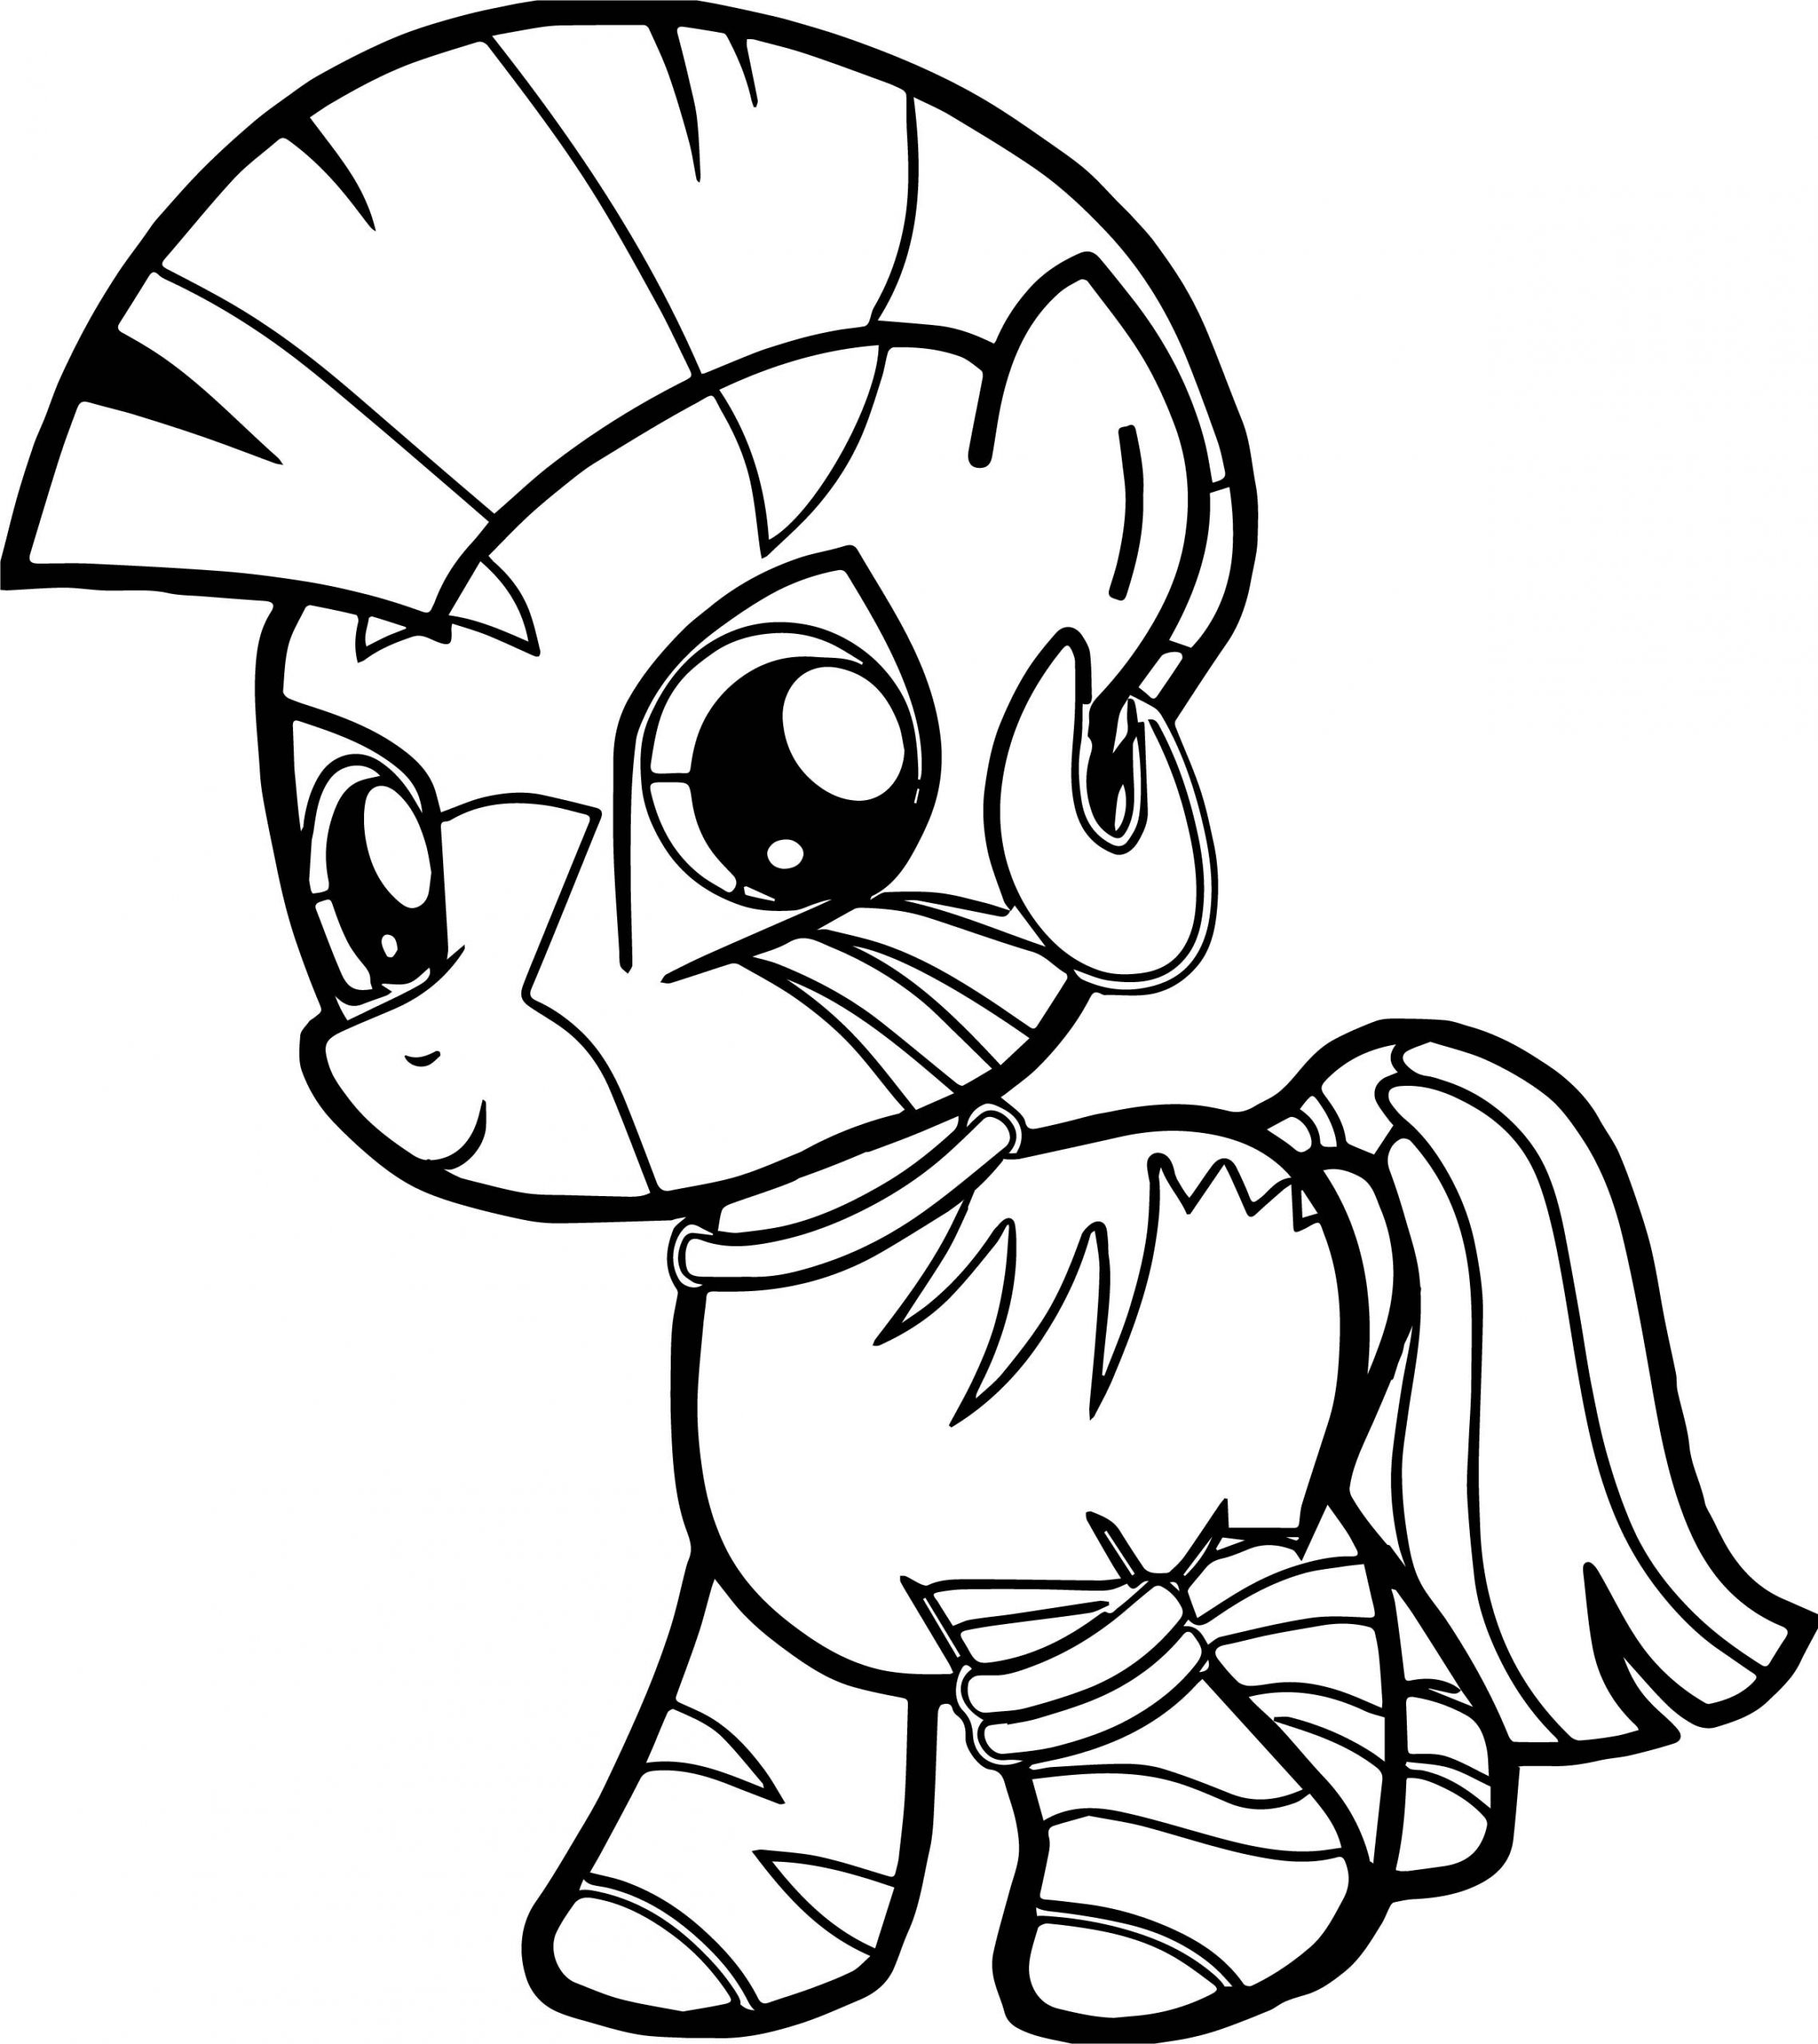 Baby Pony Coloring Pages
 Zecora Filly Very Cute Baby Horse Coloring Page